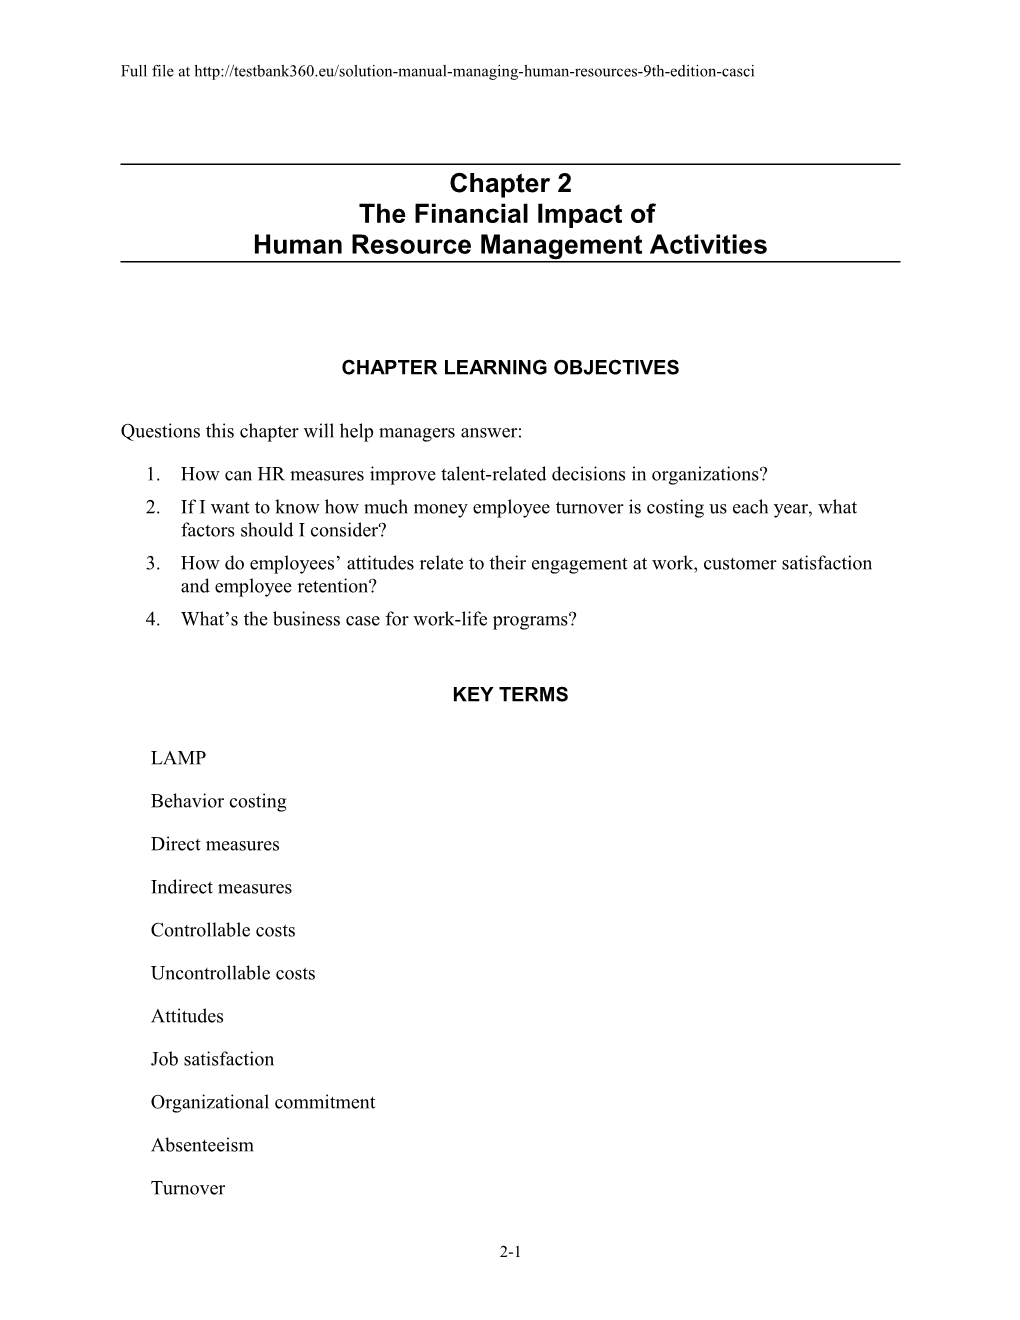 Questions This Chapter Will Help Managers Answer